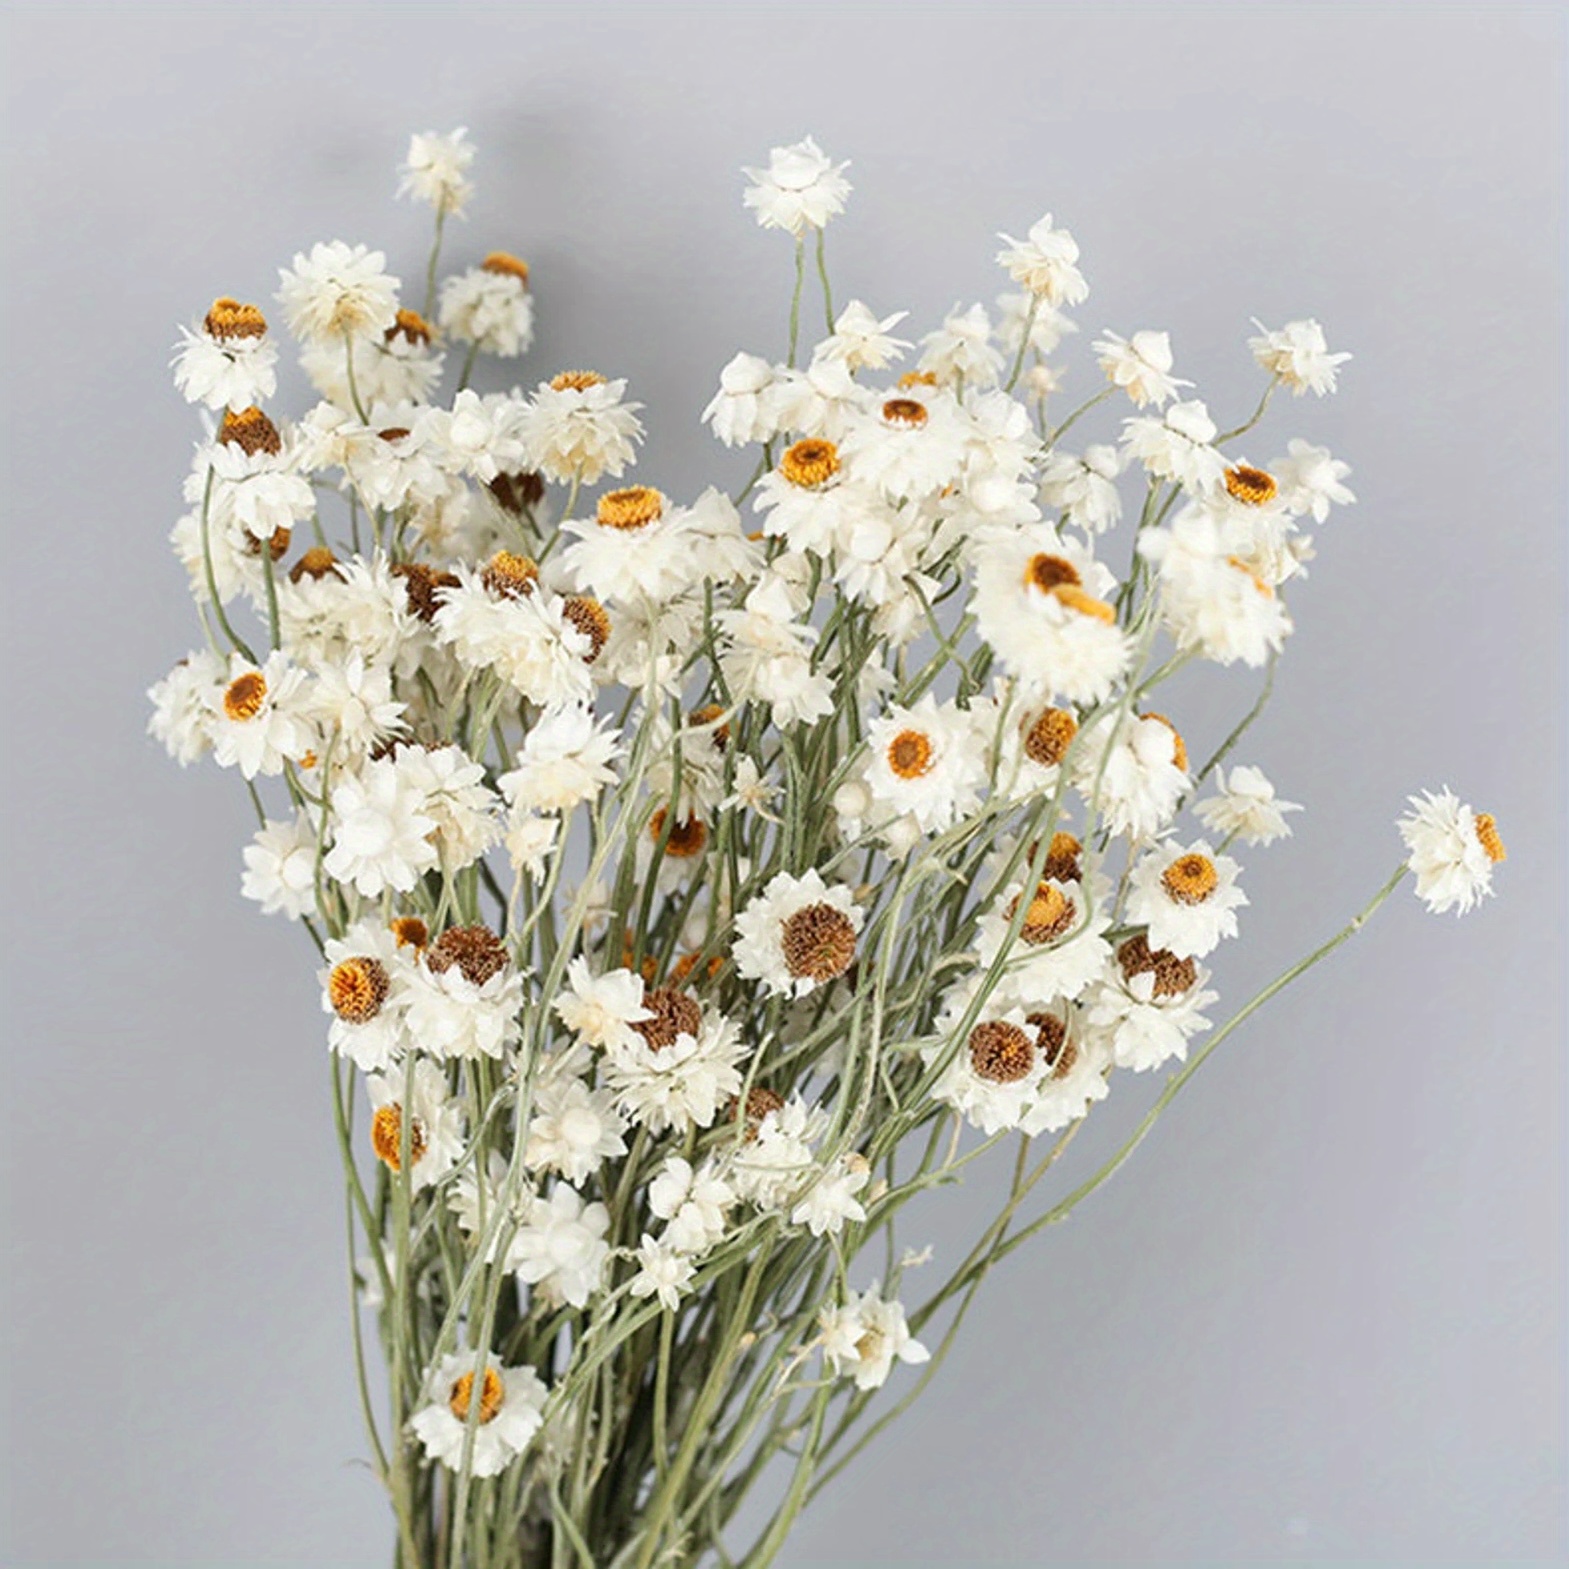 Jtoder Dried Daisy Flowers Bouquet, 200+ Real Dry White Flowers with Stems,  17'' Gerber Daisies Arrangements for Wedding, Farmhouse Vase Decorations